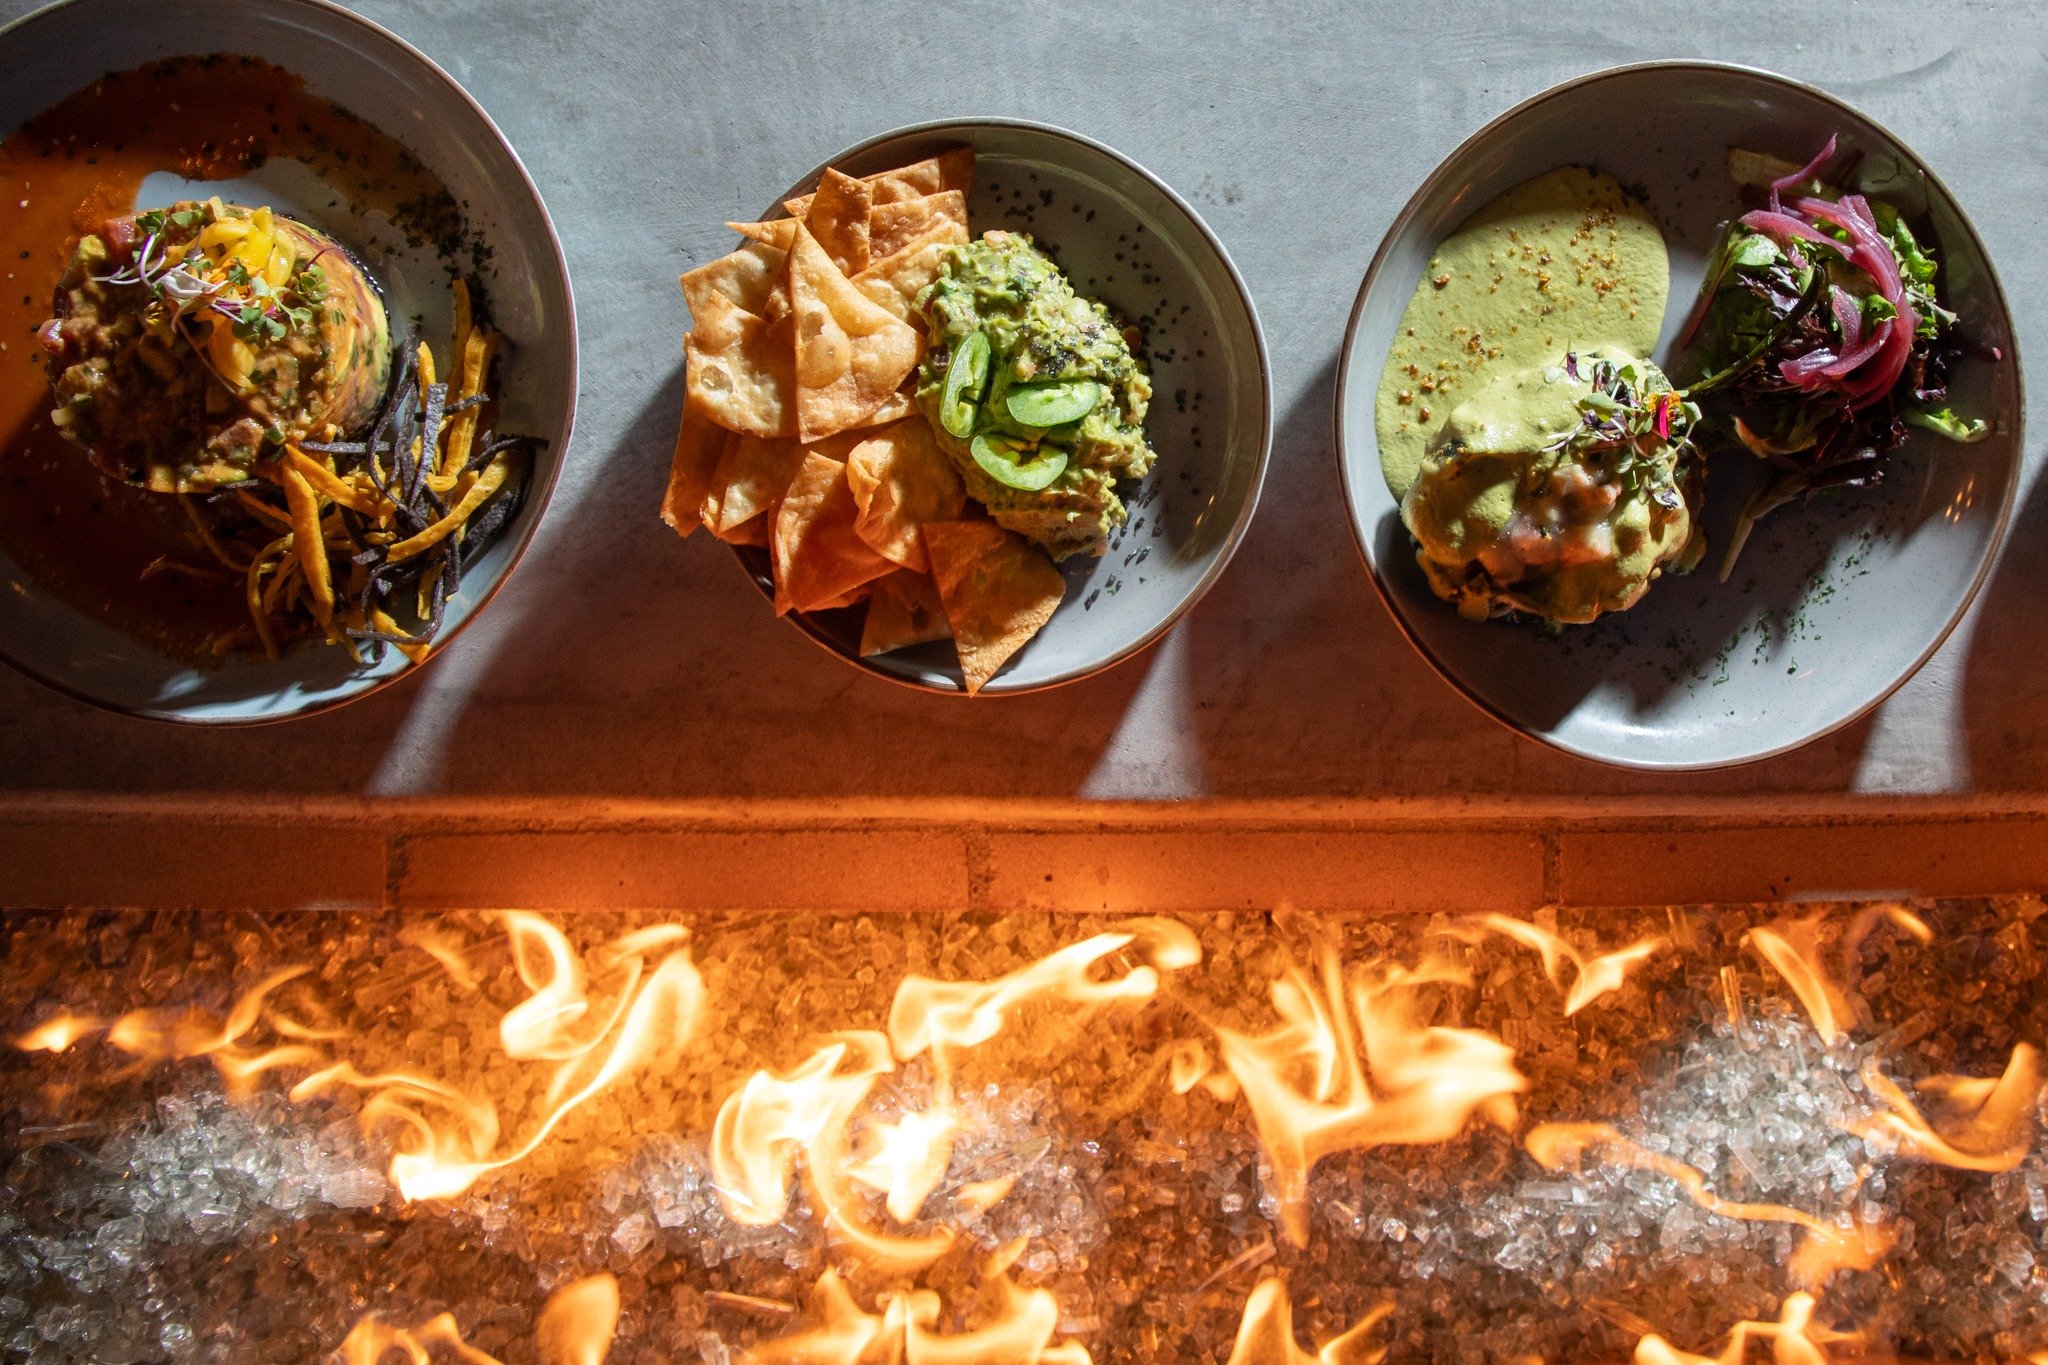 Time to feast by the fire! 
#Crudo #VisitPalmSprings #DineGPS #FoodContent